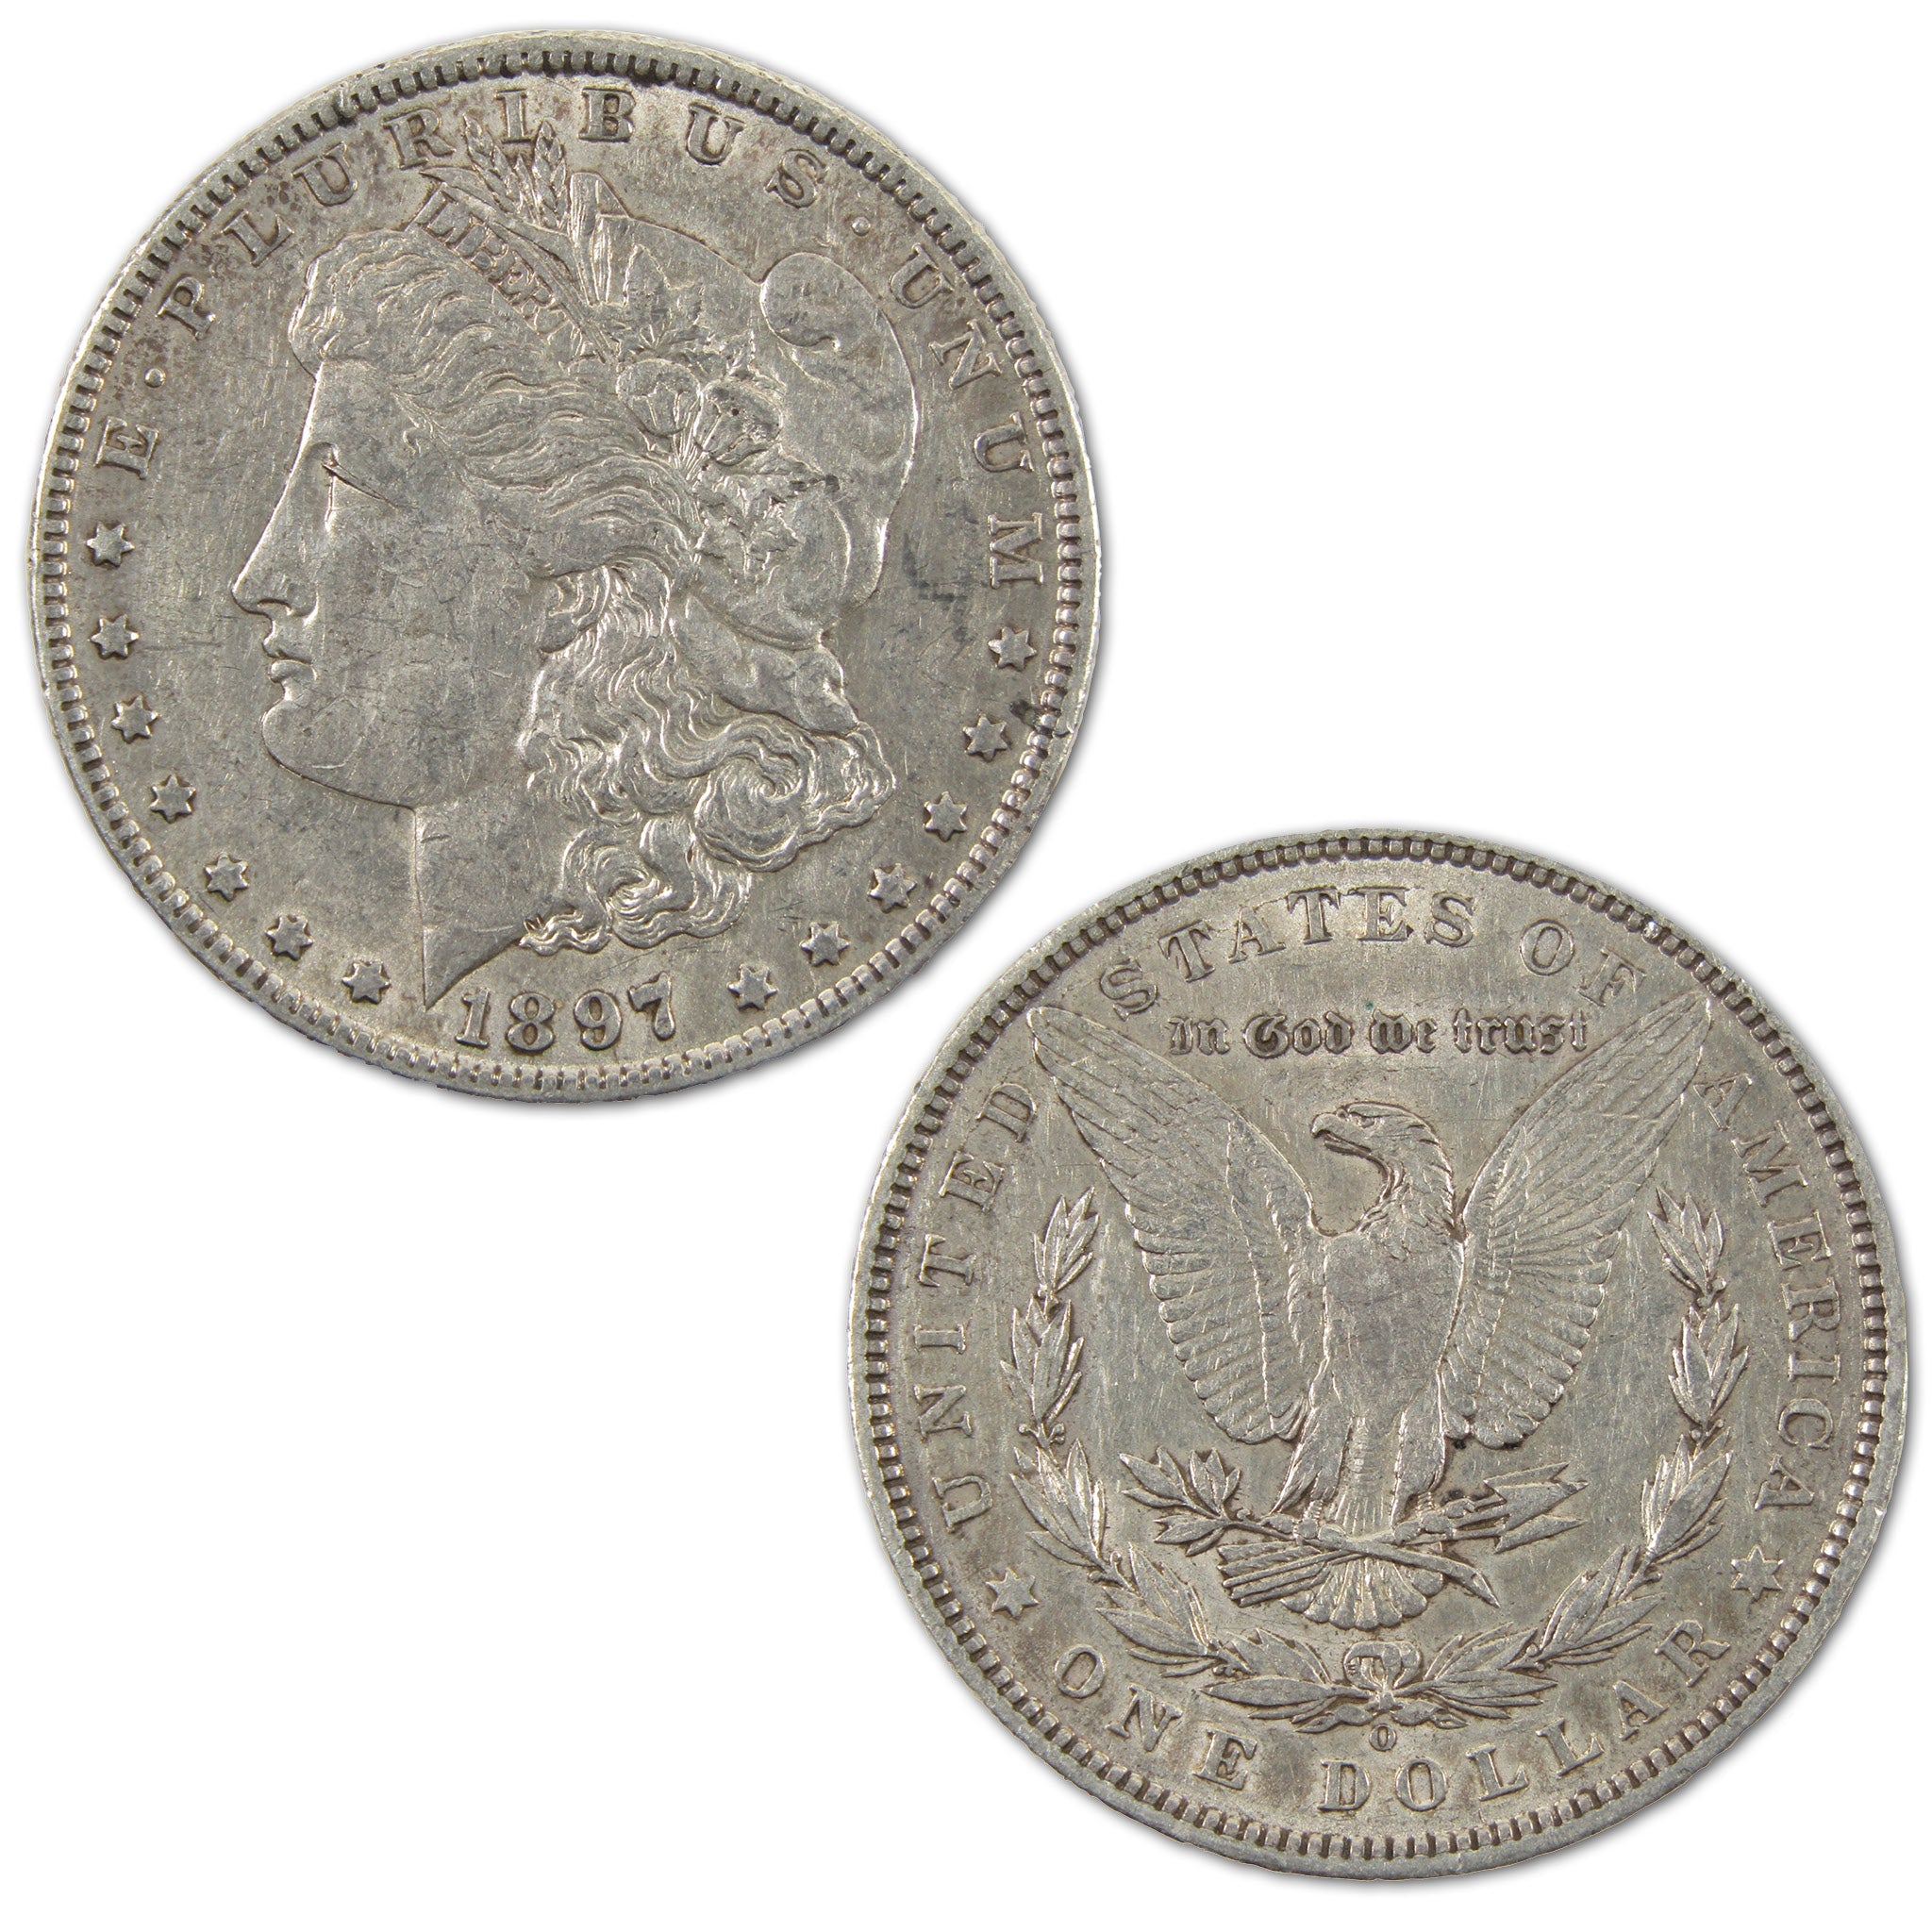 1897 O Morgan Dollar XF EF Extremely Fine Silver $1 Coin SKU:I10762 - Morgan coin - Morgan silver dollar - Morgan silver dollar for sale - Profile Coins &amp; Collectibles